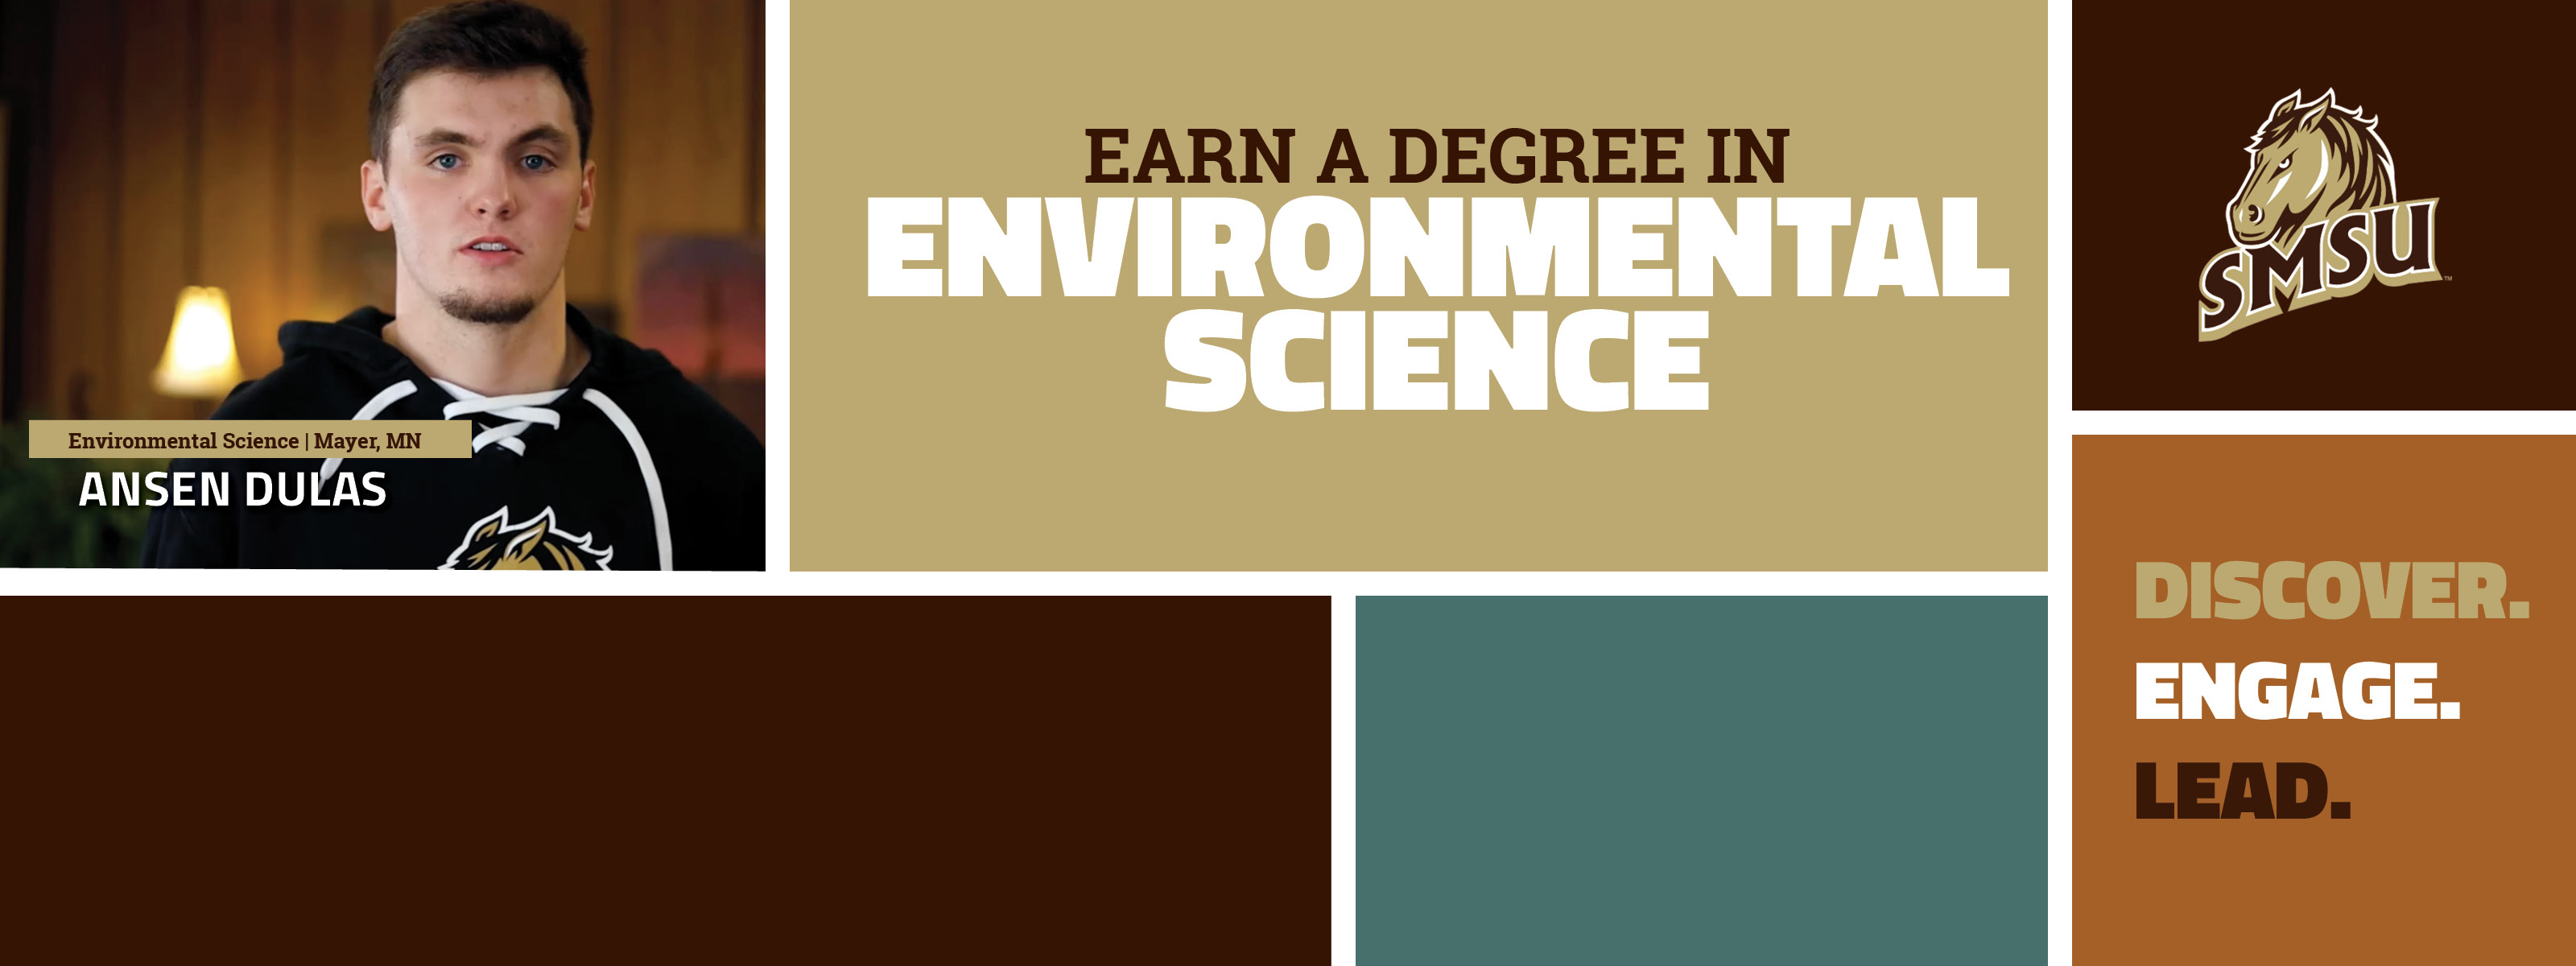 Earn A Degree In Environmental Science - Discover. Engage. Lead.